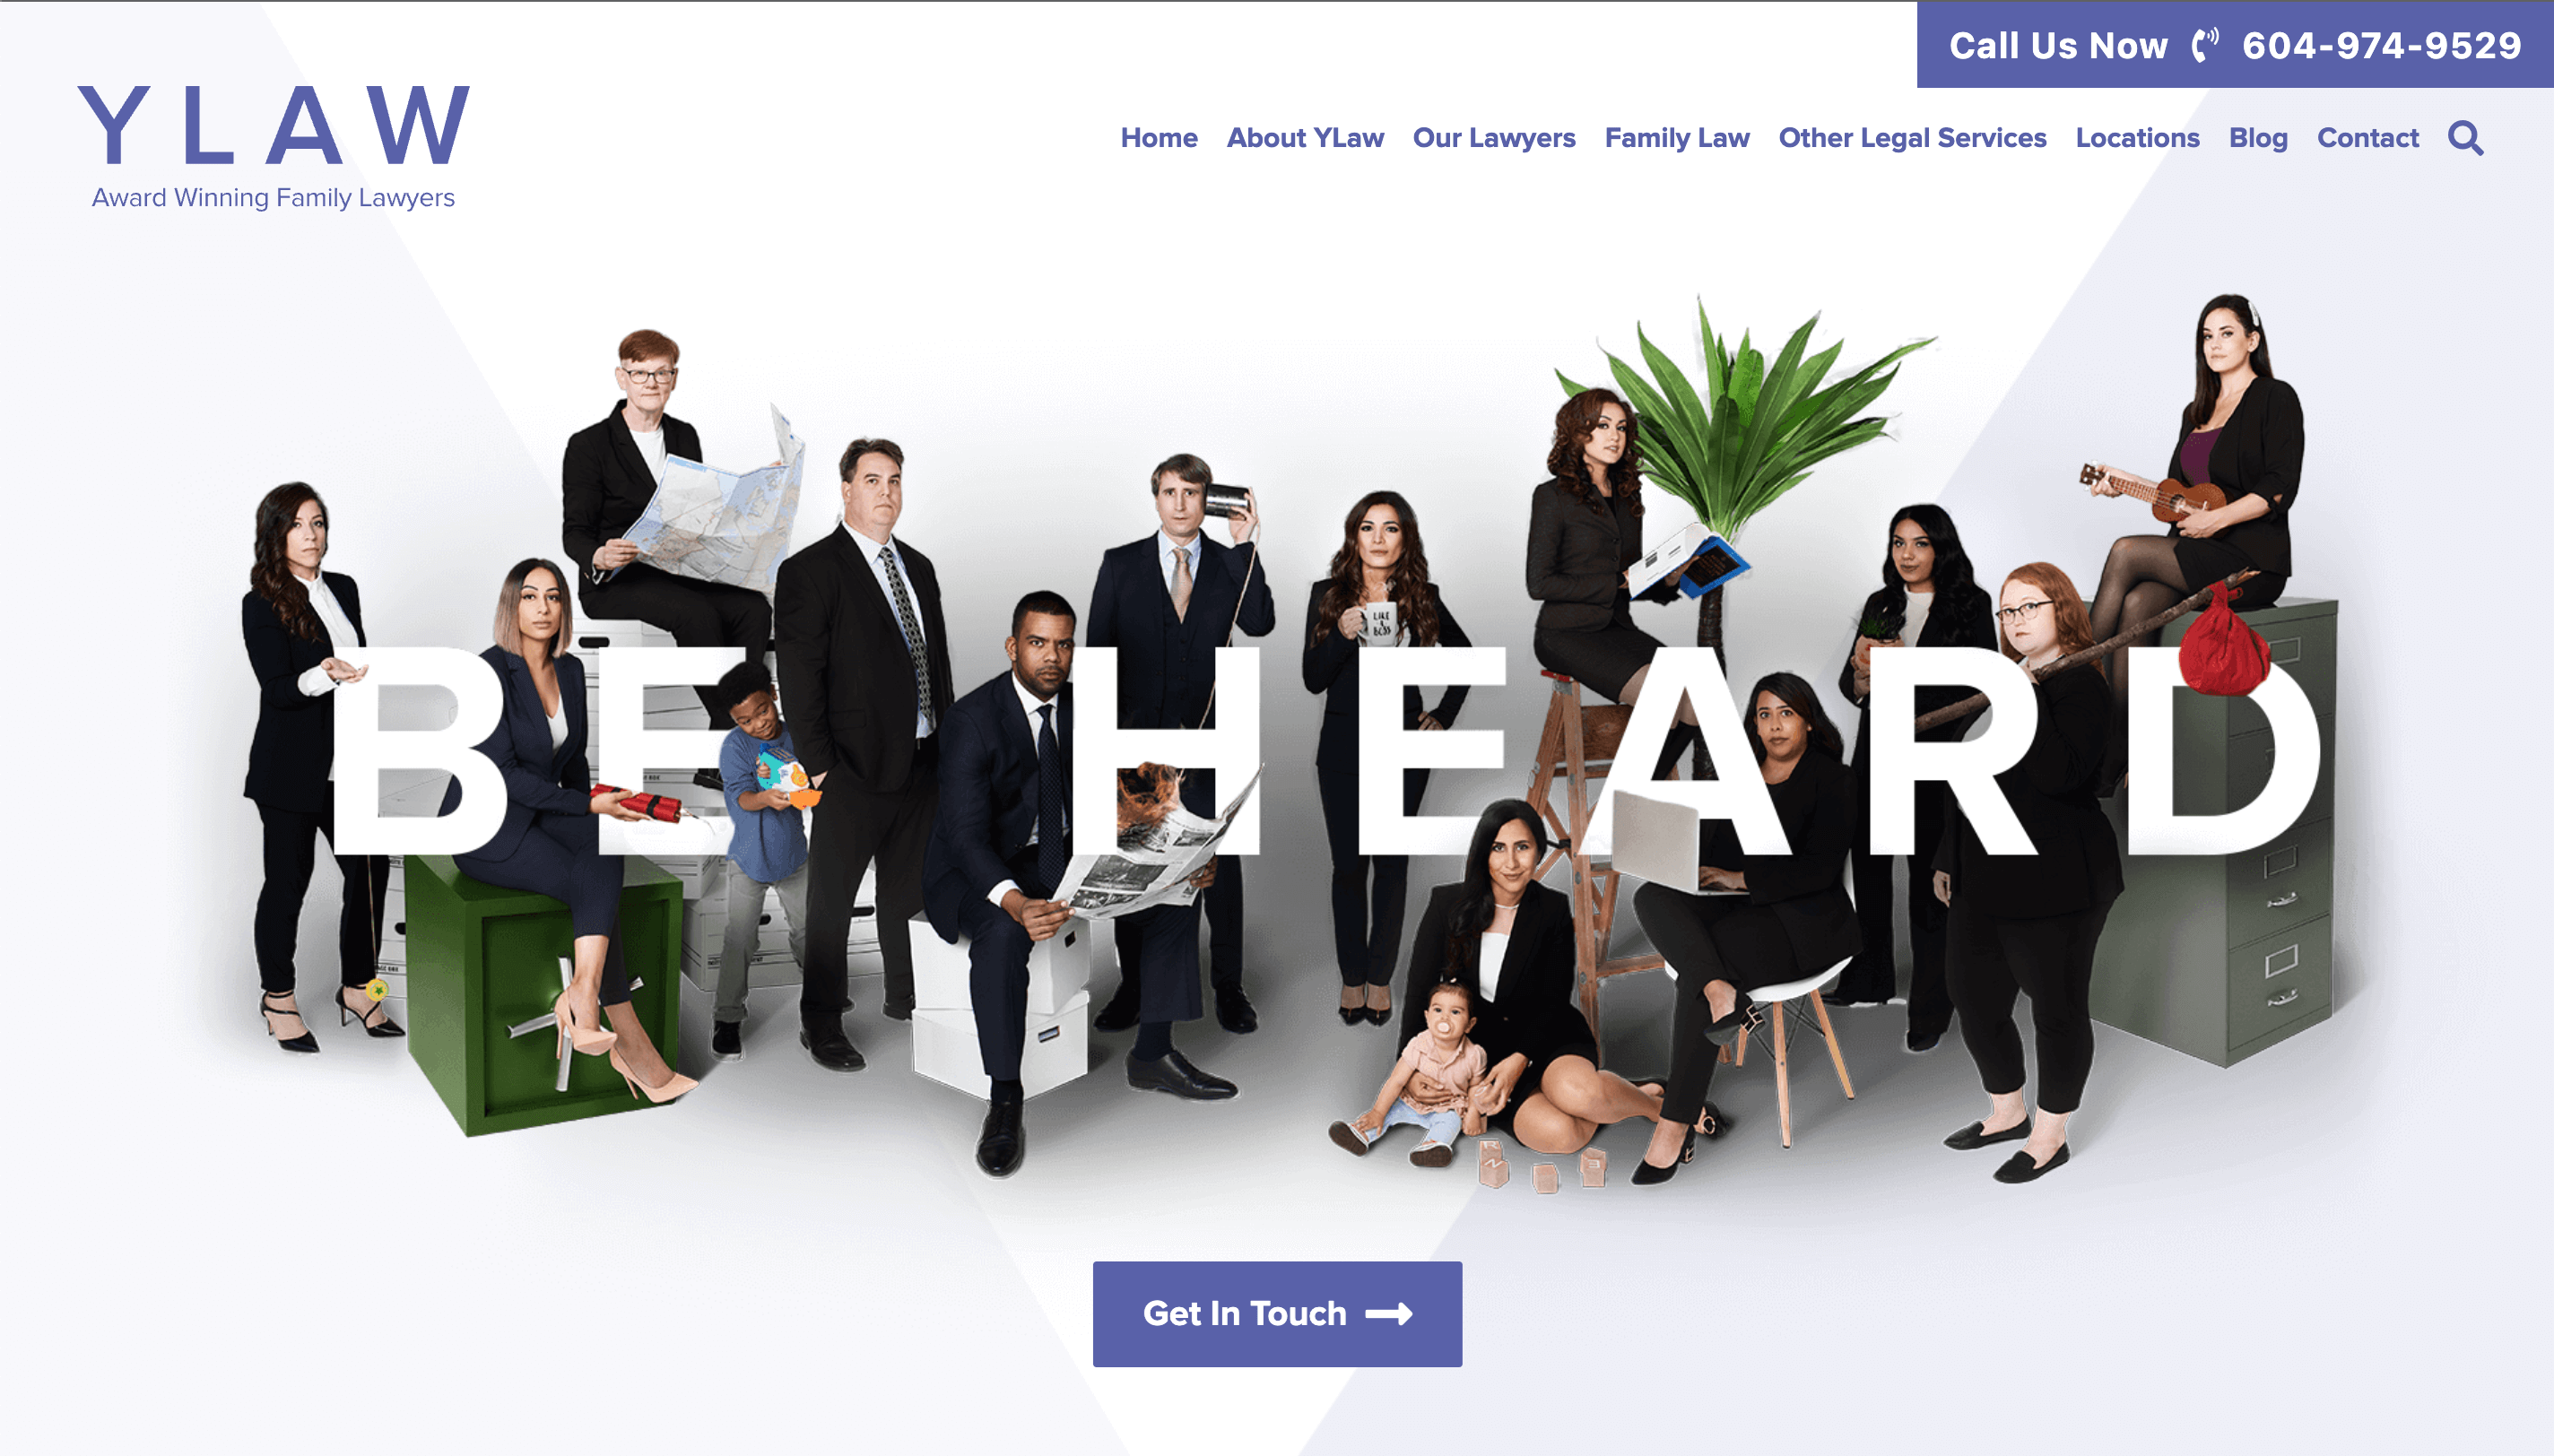 YLAW group's homepage featuring a photo of the attorneys, their kids, and various props sitting among the words "BE HEARD"